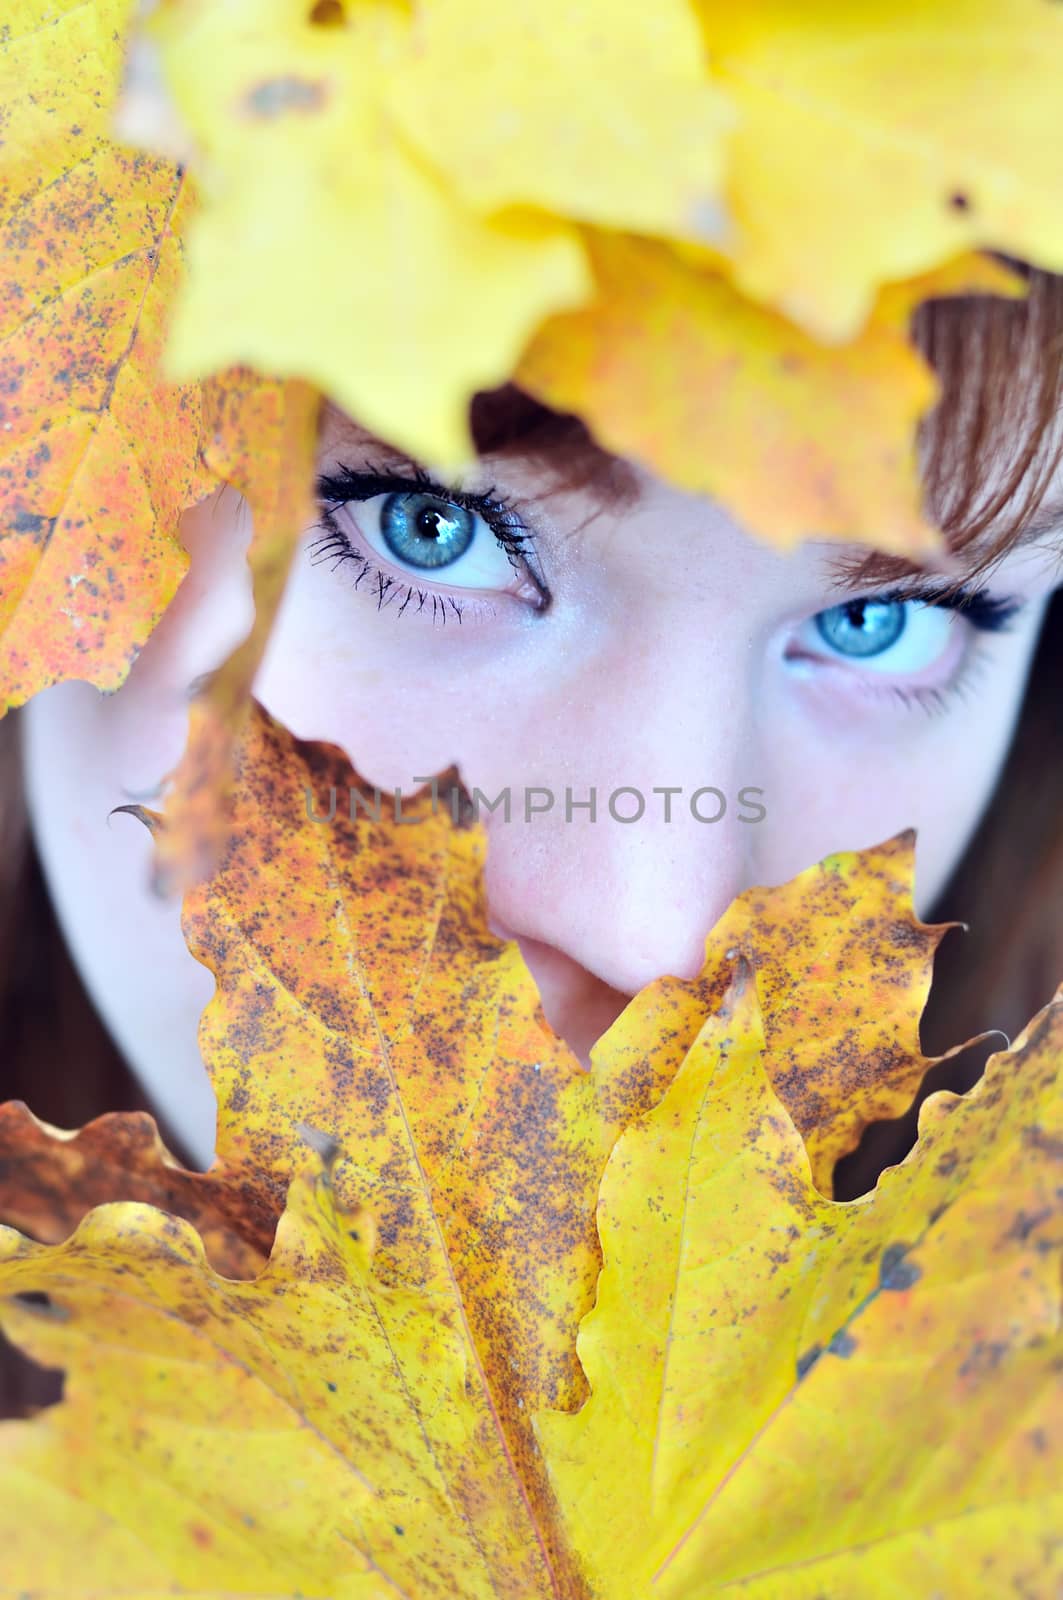 autumn blue eyes of girl between yellow leaves